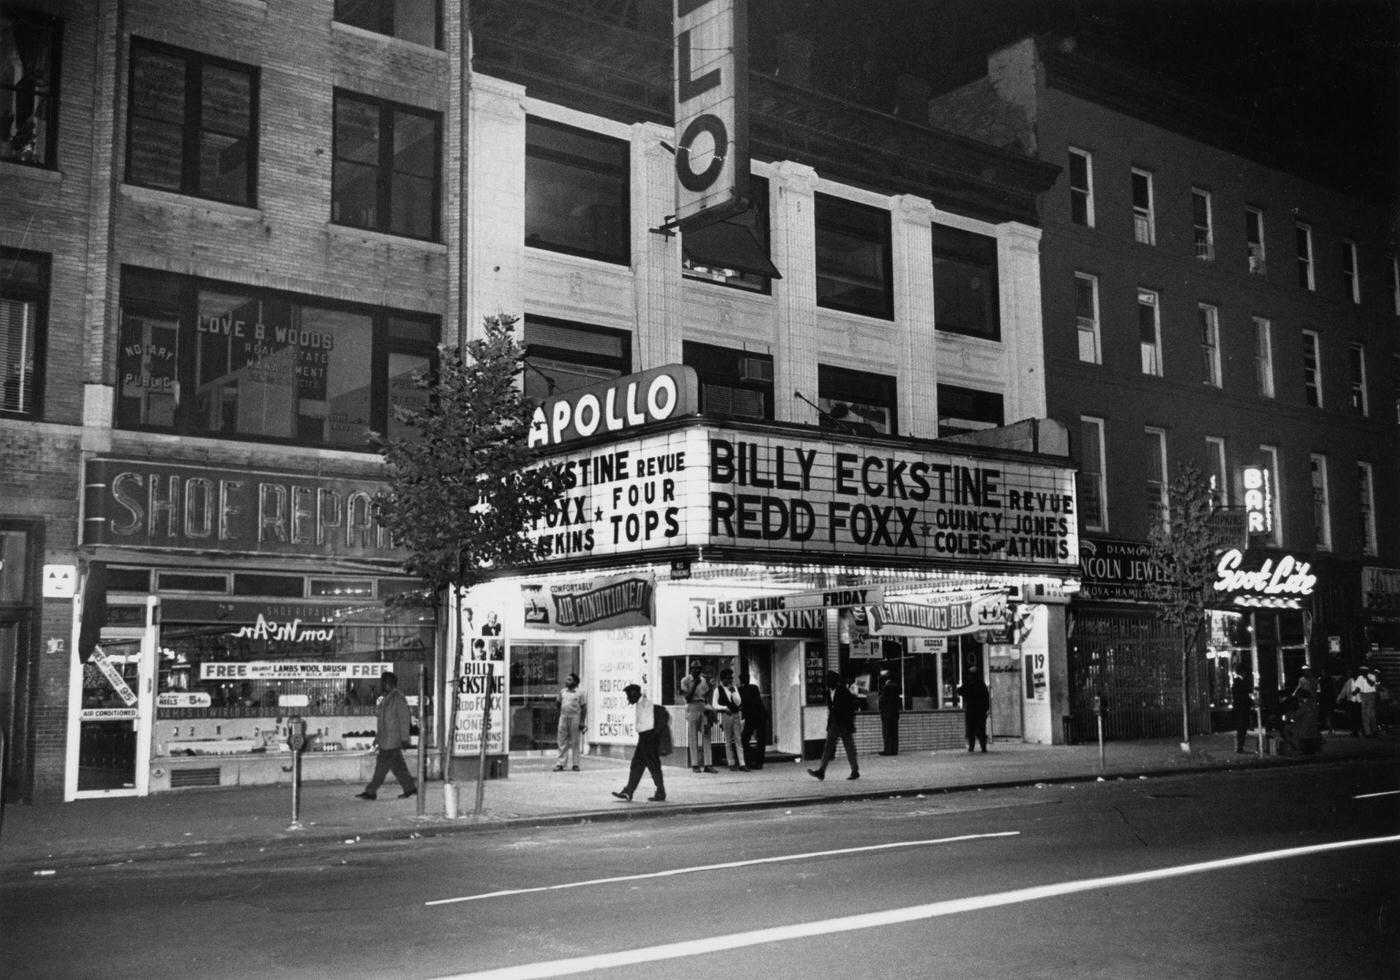 Performances By Billy Eckstine Revue, Quincy Jones And Others Advertised At The Apollo Theater In Harlem, Manhattan, 1964